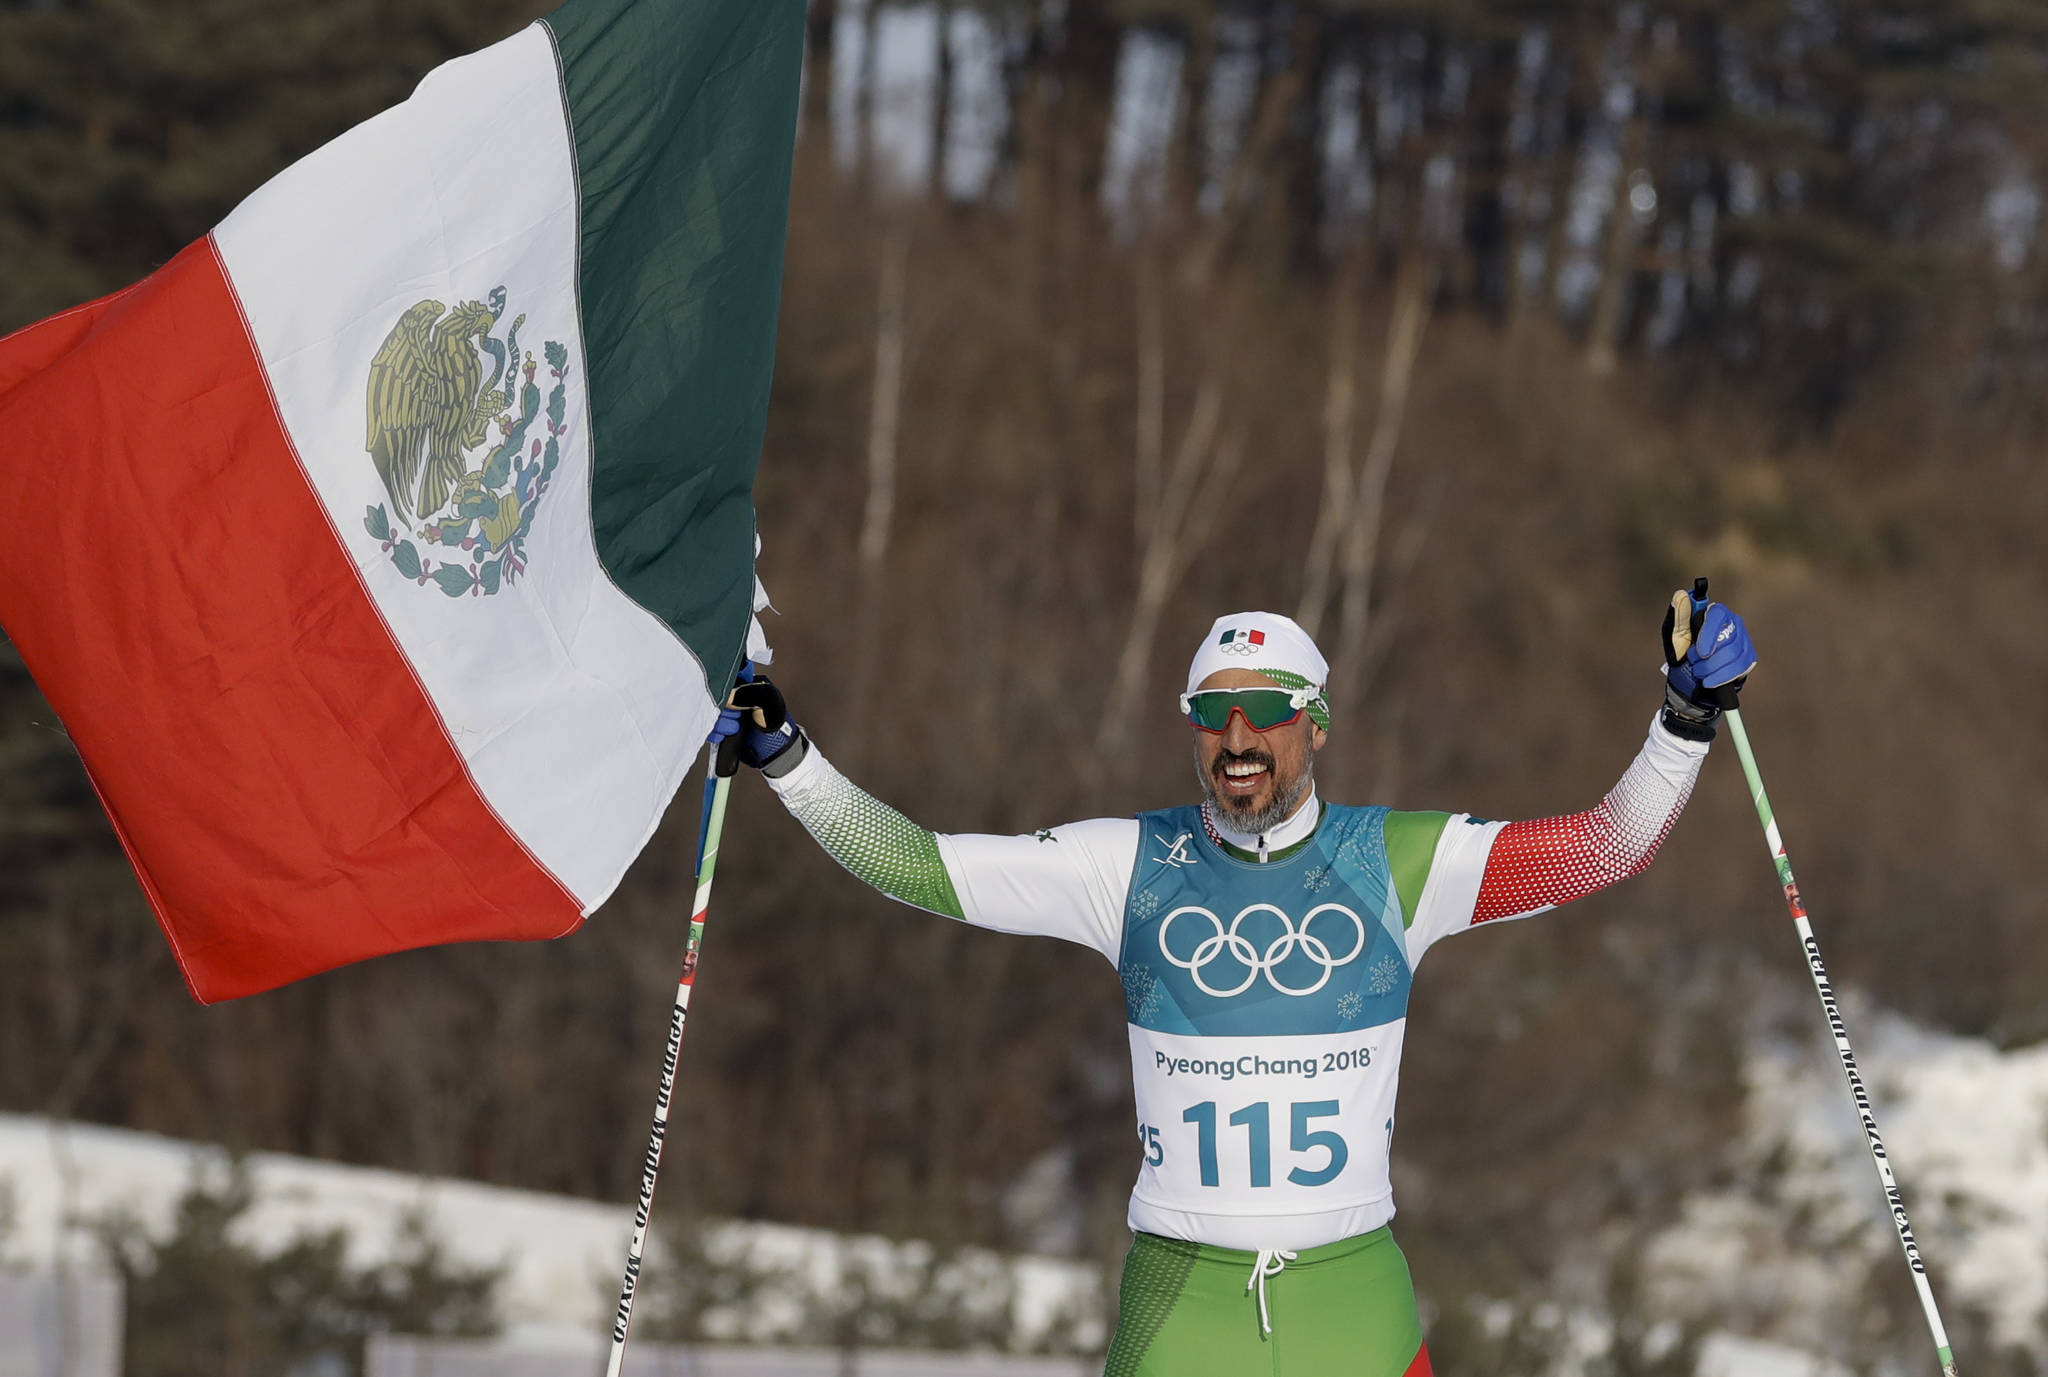 German Madrazo, of Mexico, holds up his flag after finishing last in the men’s 15km freestyle cross-country skiing competition at the 2018 Winter Olympics in Pyeongchang, South Korea, Friday. (AP Photo/Kirsty Wigglesworth)